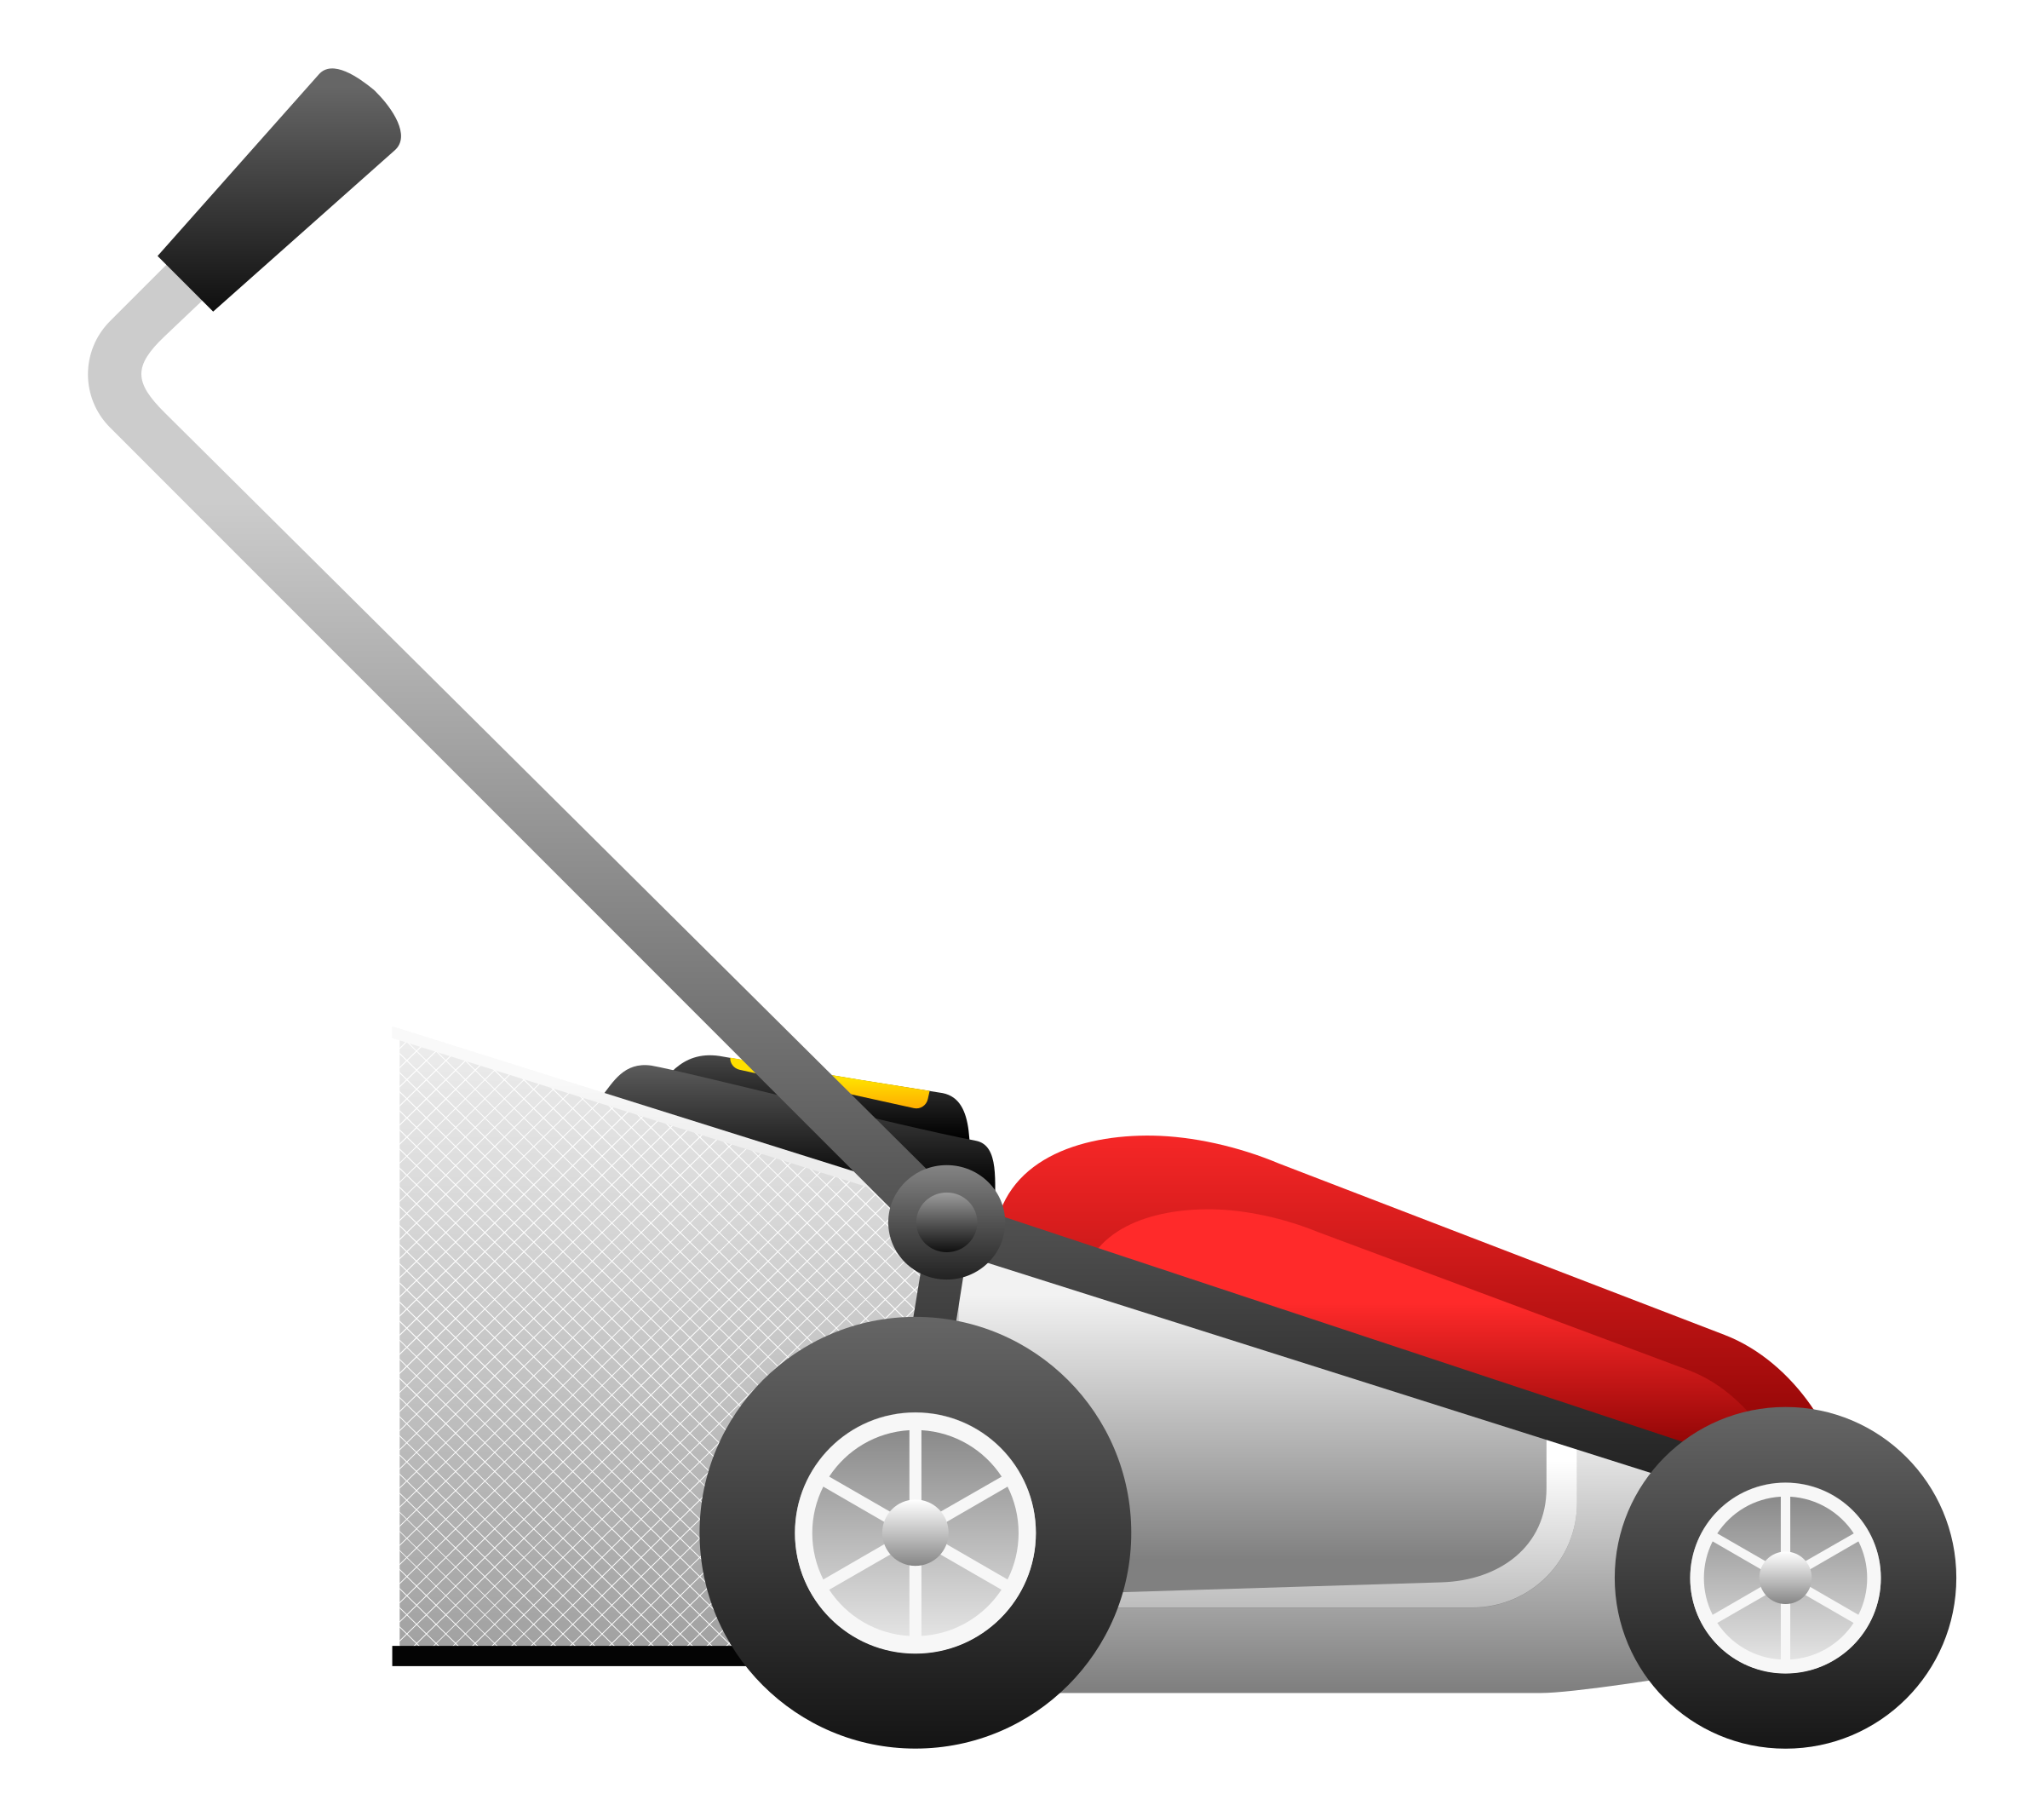 mowing clipart lawn tool